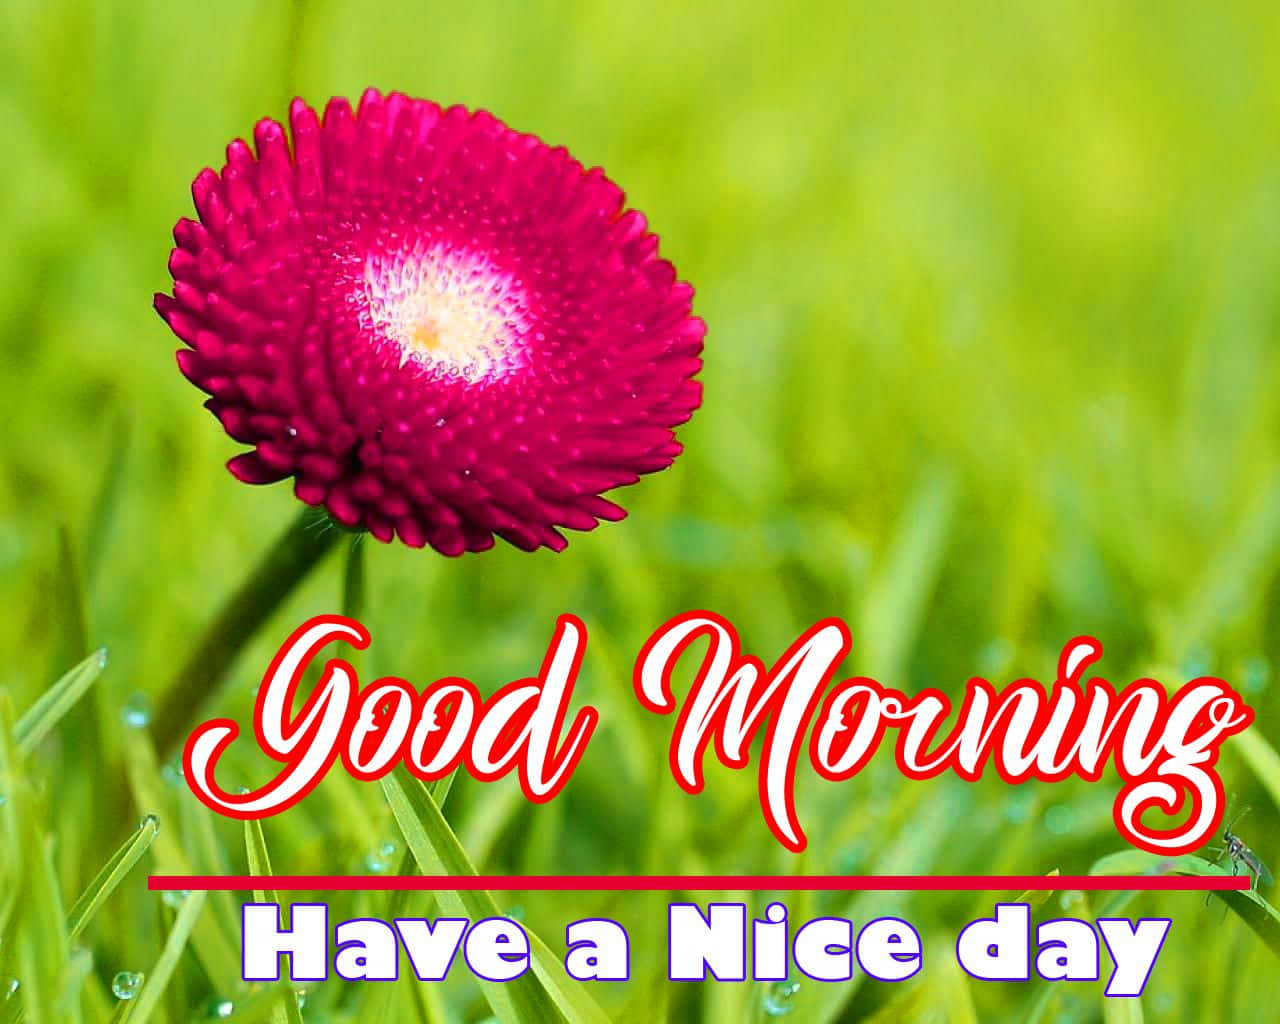 Download Start your day with a good morning and some encouraging flowers.  Wallpaper